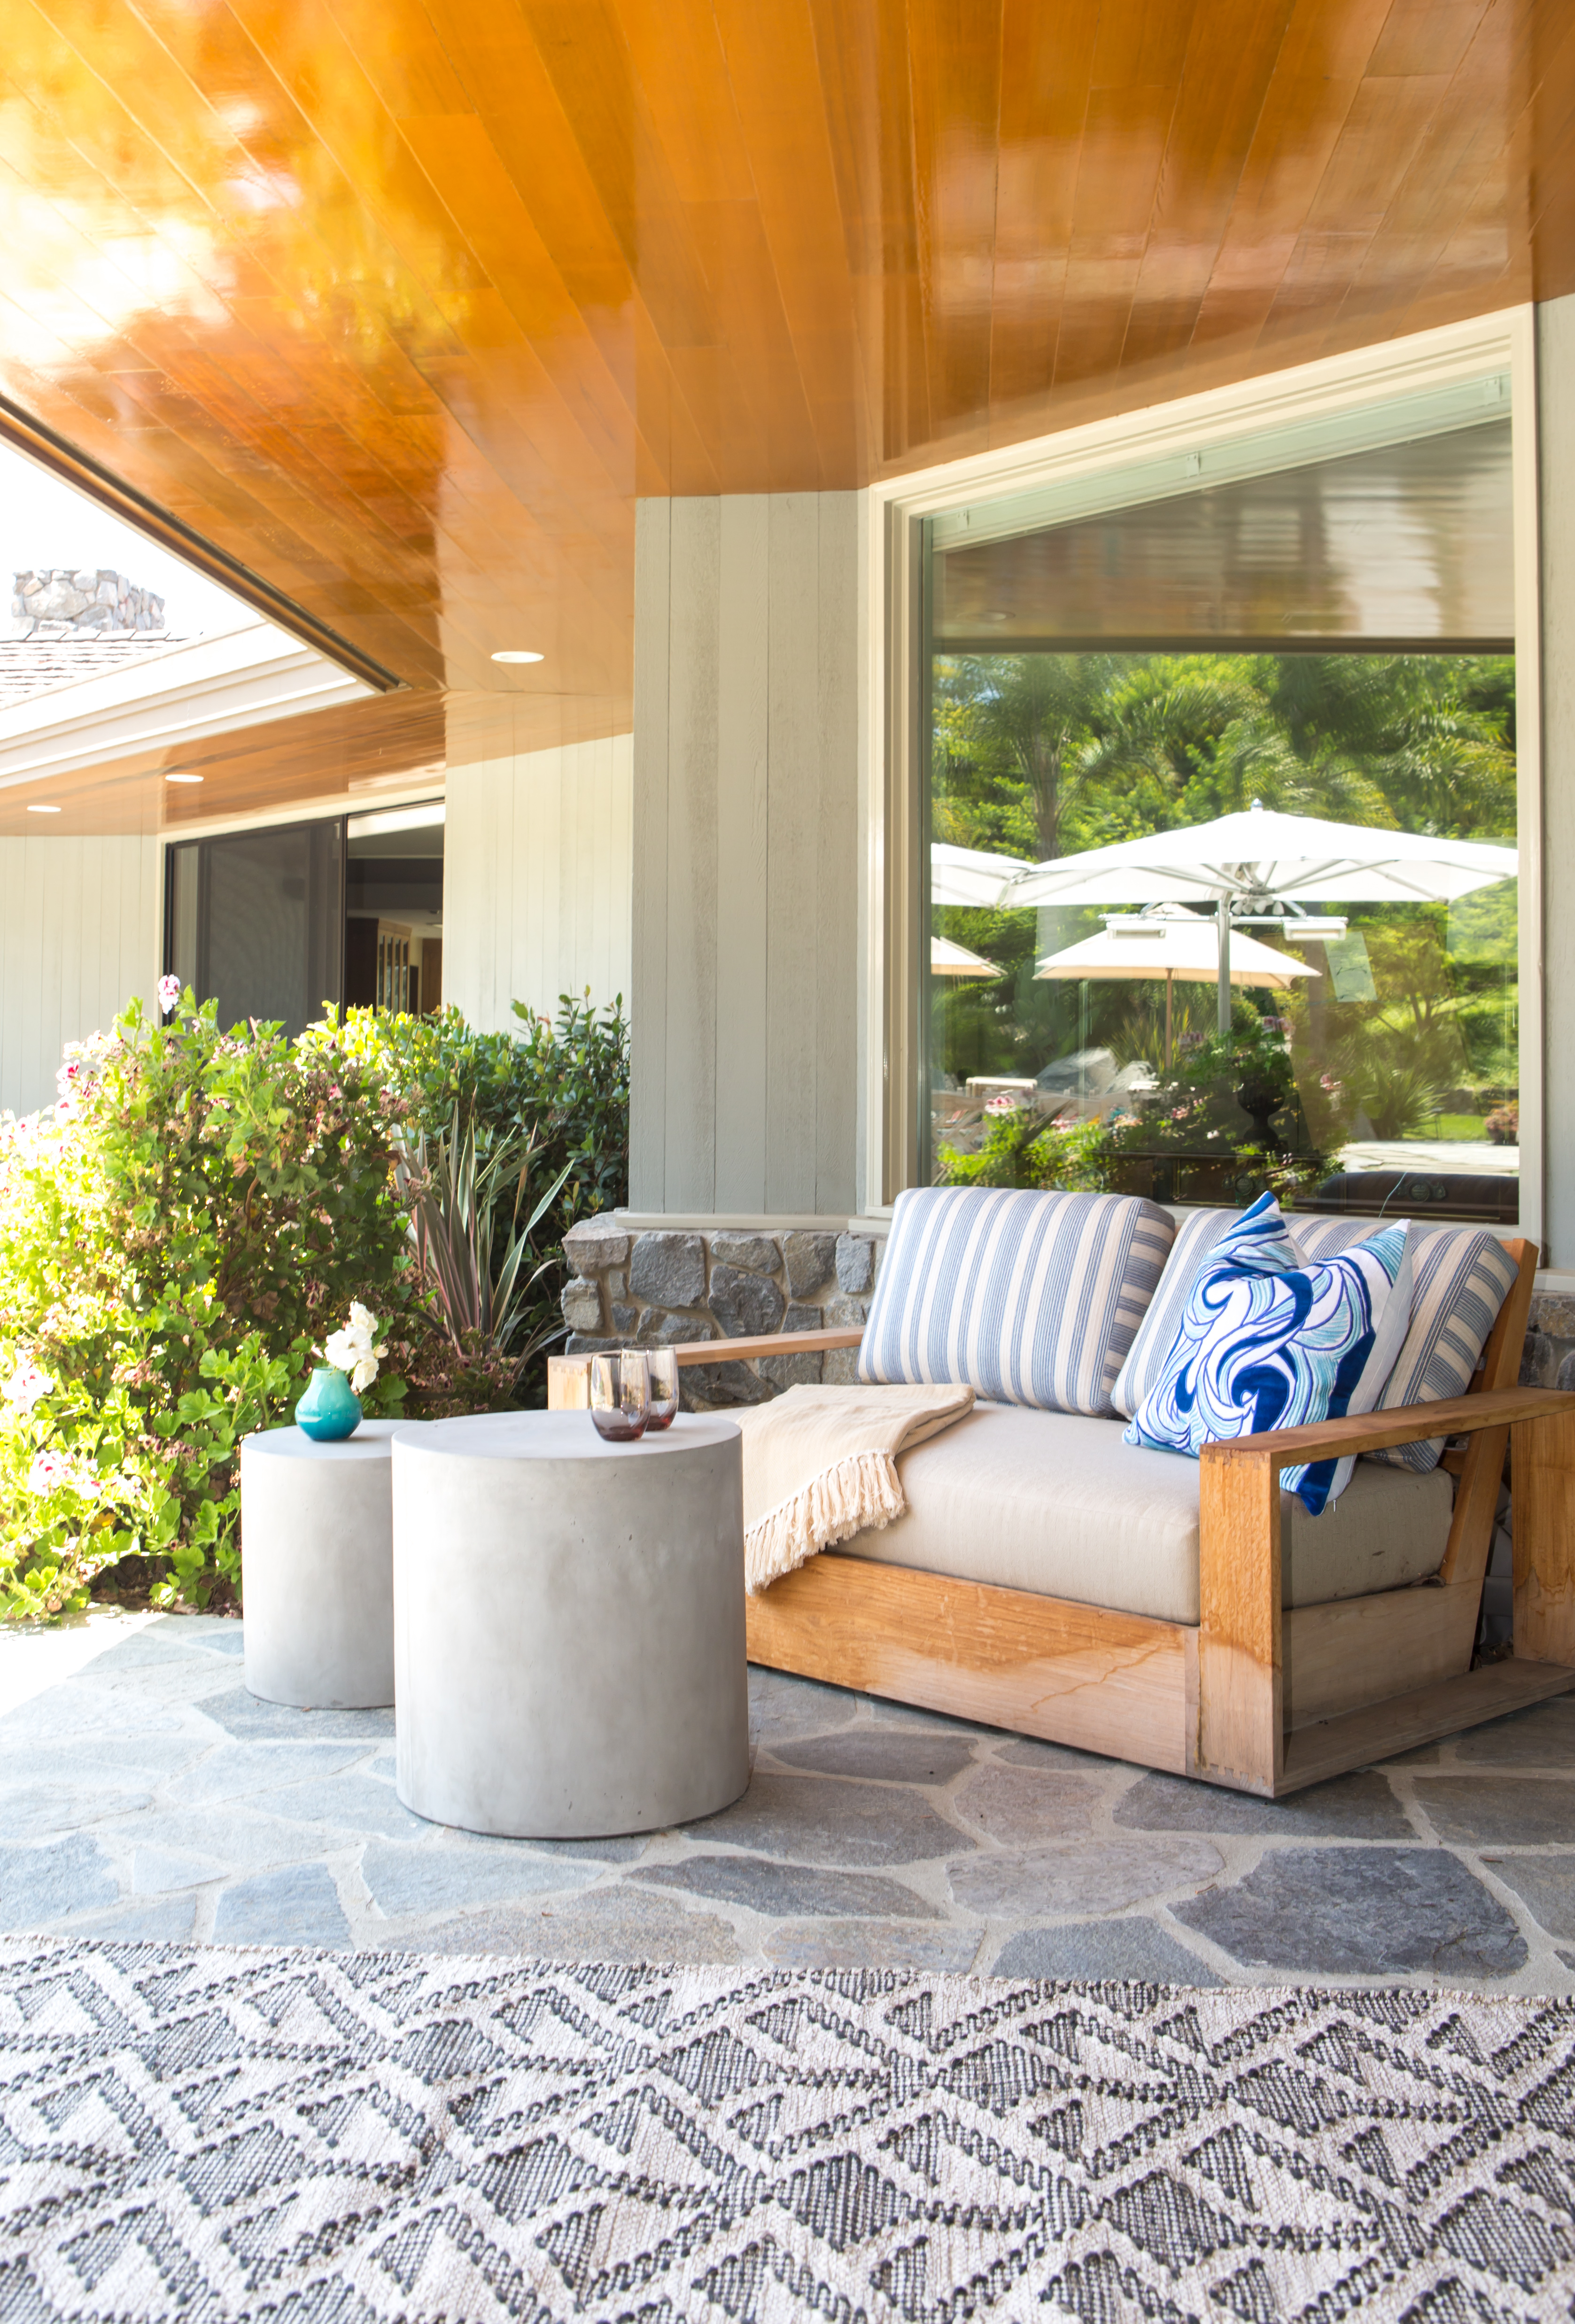 We work on some incredible indoor-outdoor living spaces and in order to seamlessly transition from indoor to out, we utilize durable fabrics and materials that could just as easily be included inside!